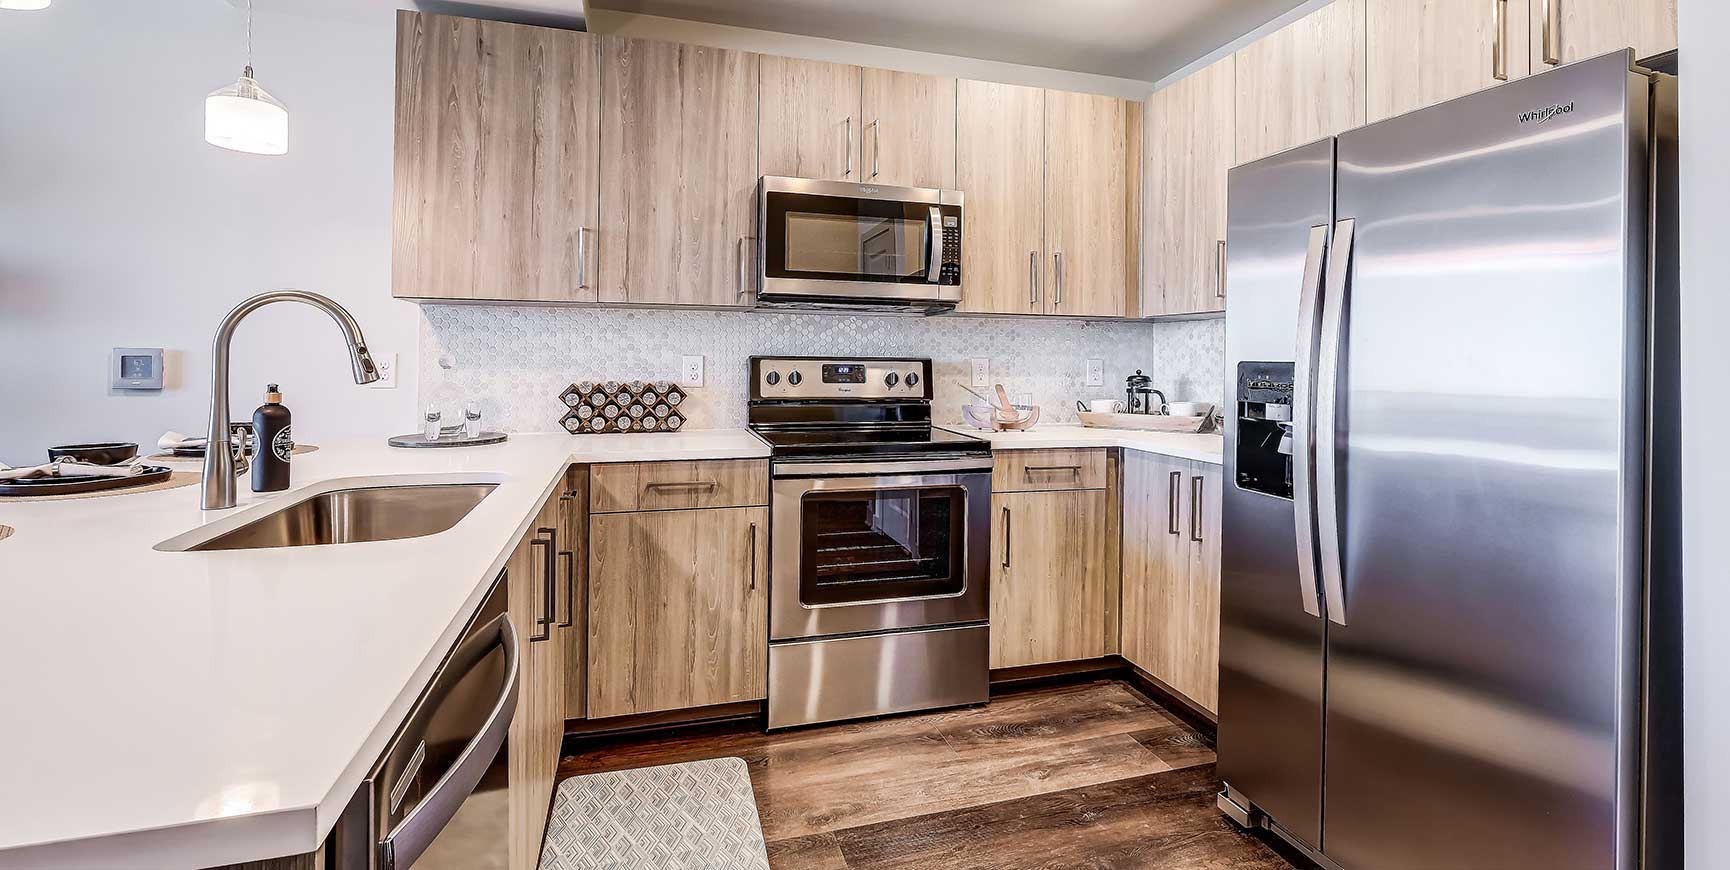 One bedroom kitchen with stainless steel Whirlpool appliances